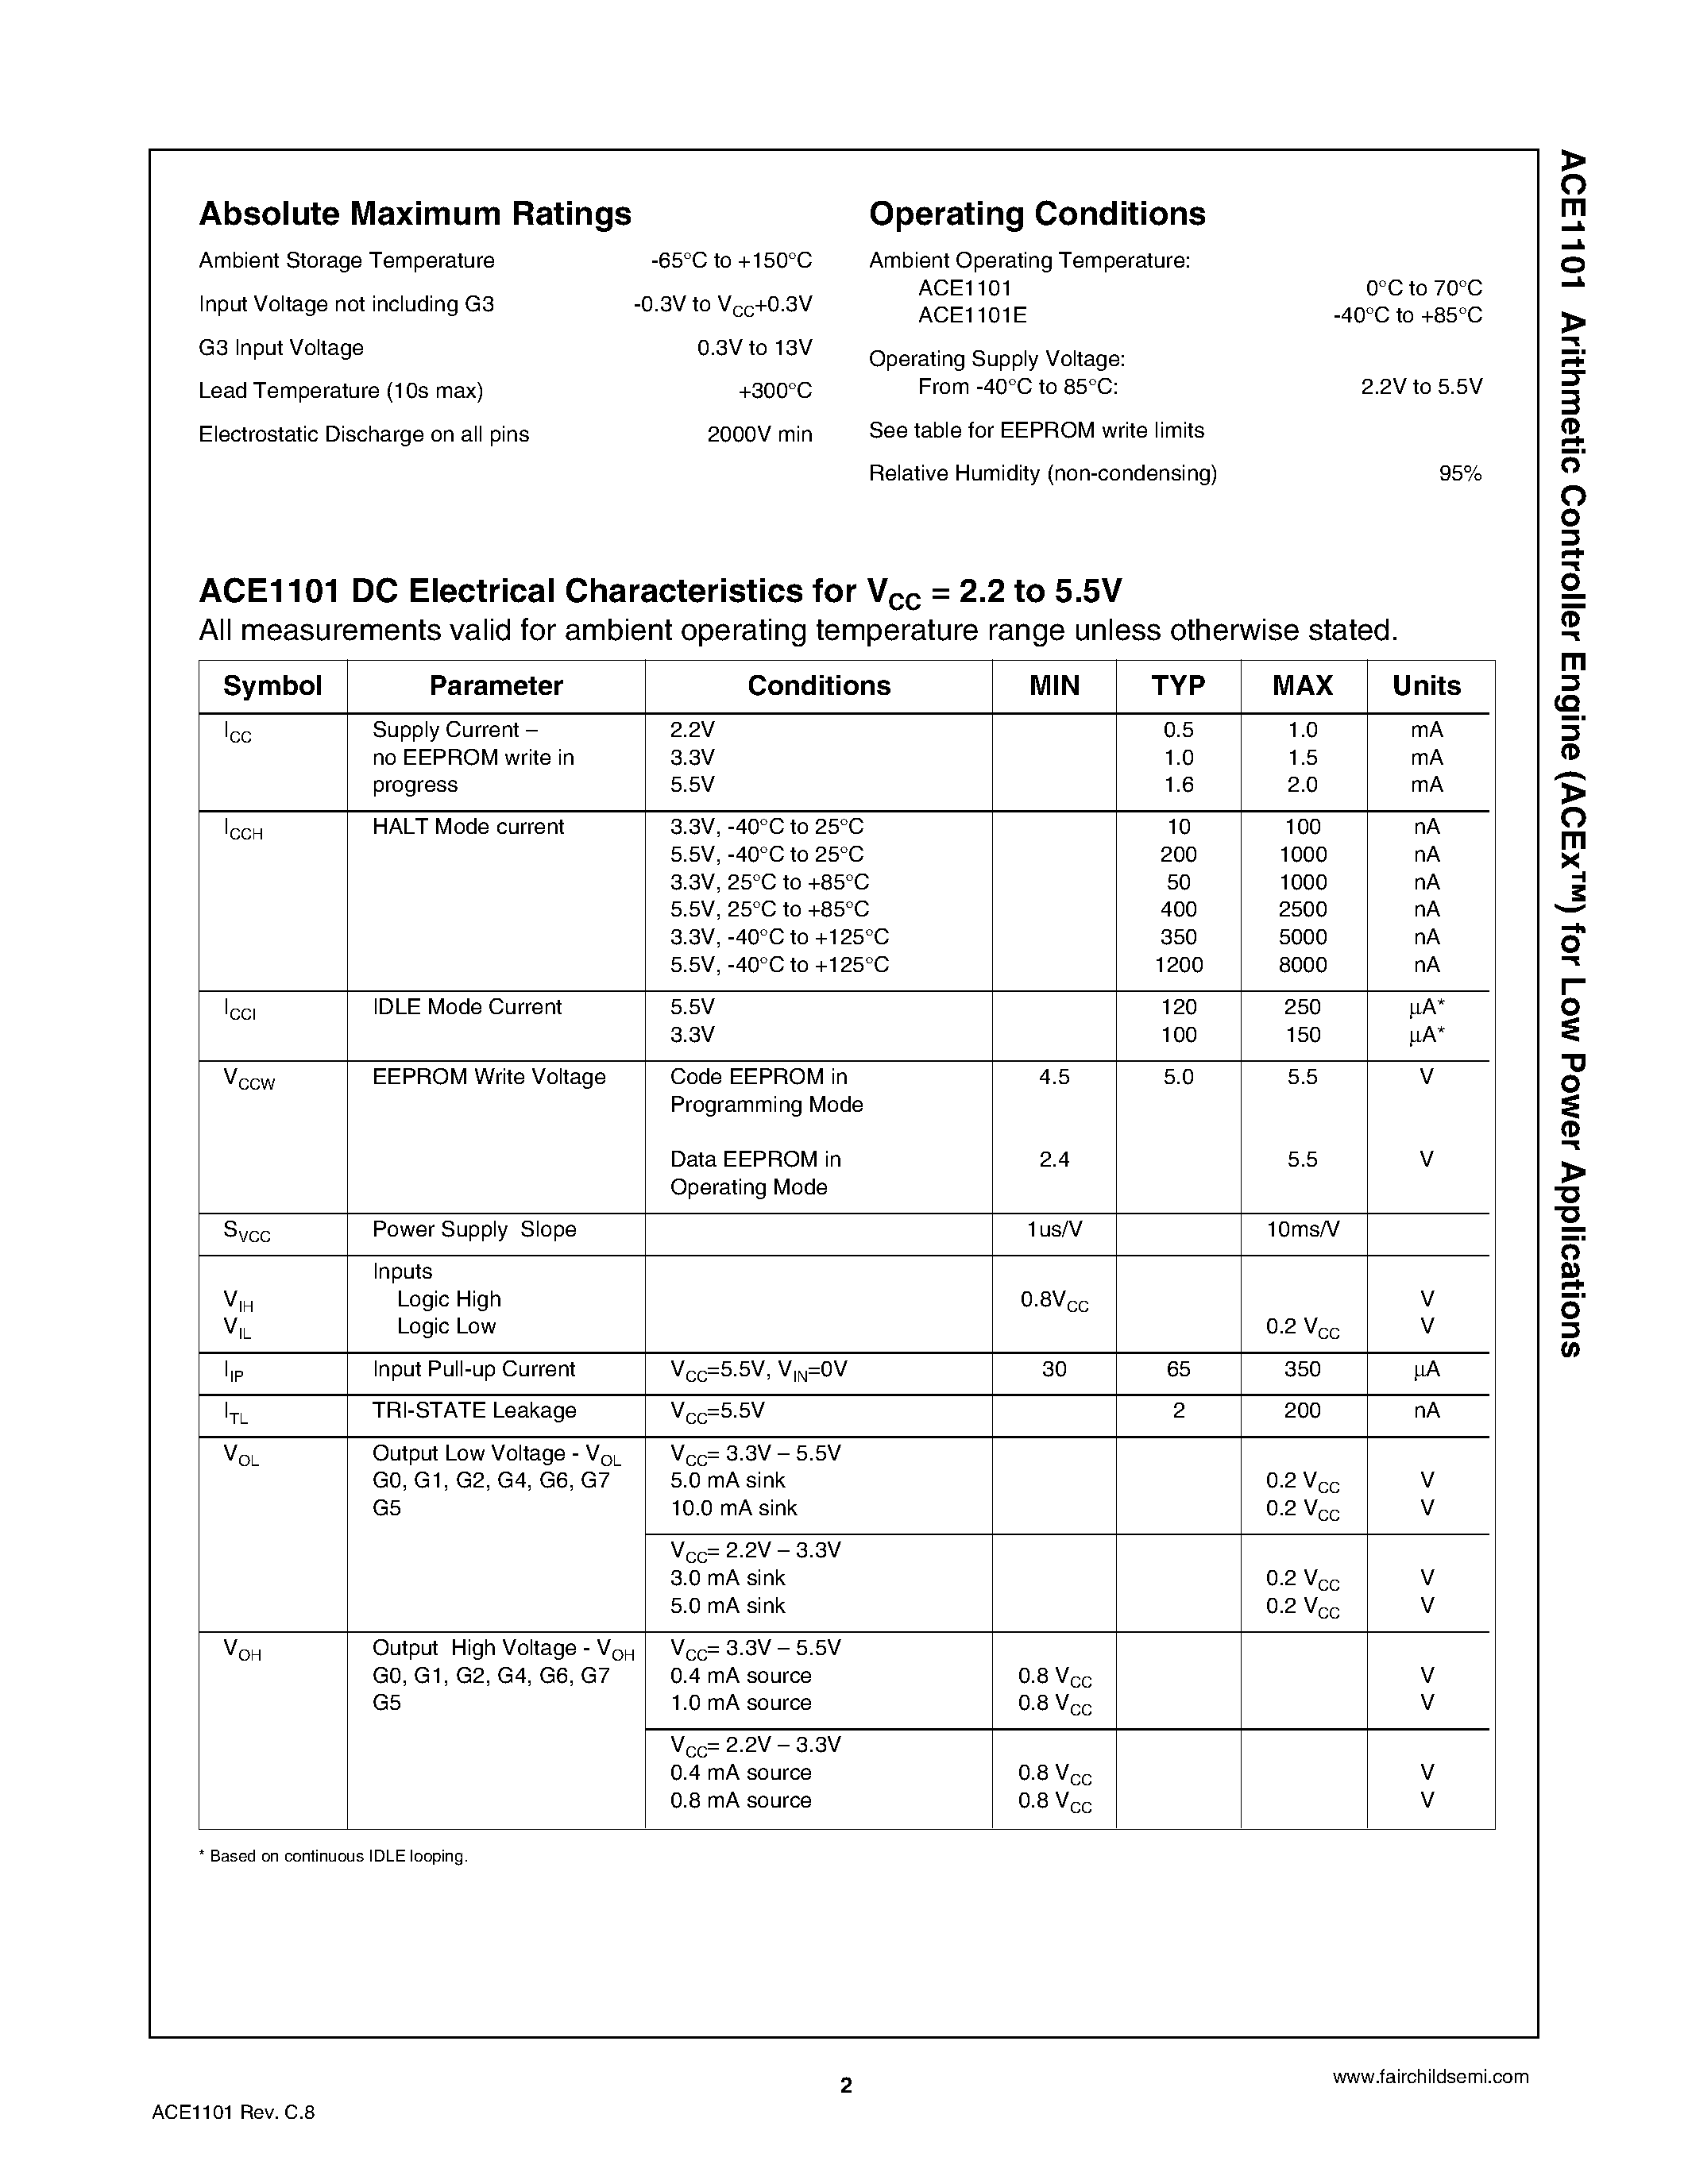 Datasheet ACE1101B - Arithmetic Controller Engine (ACEx) for Low Power Applications page 2